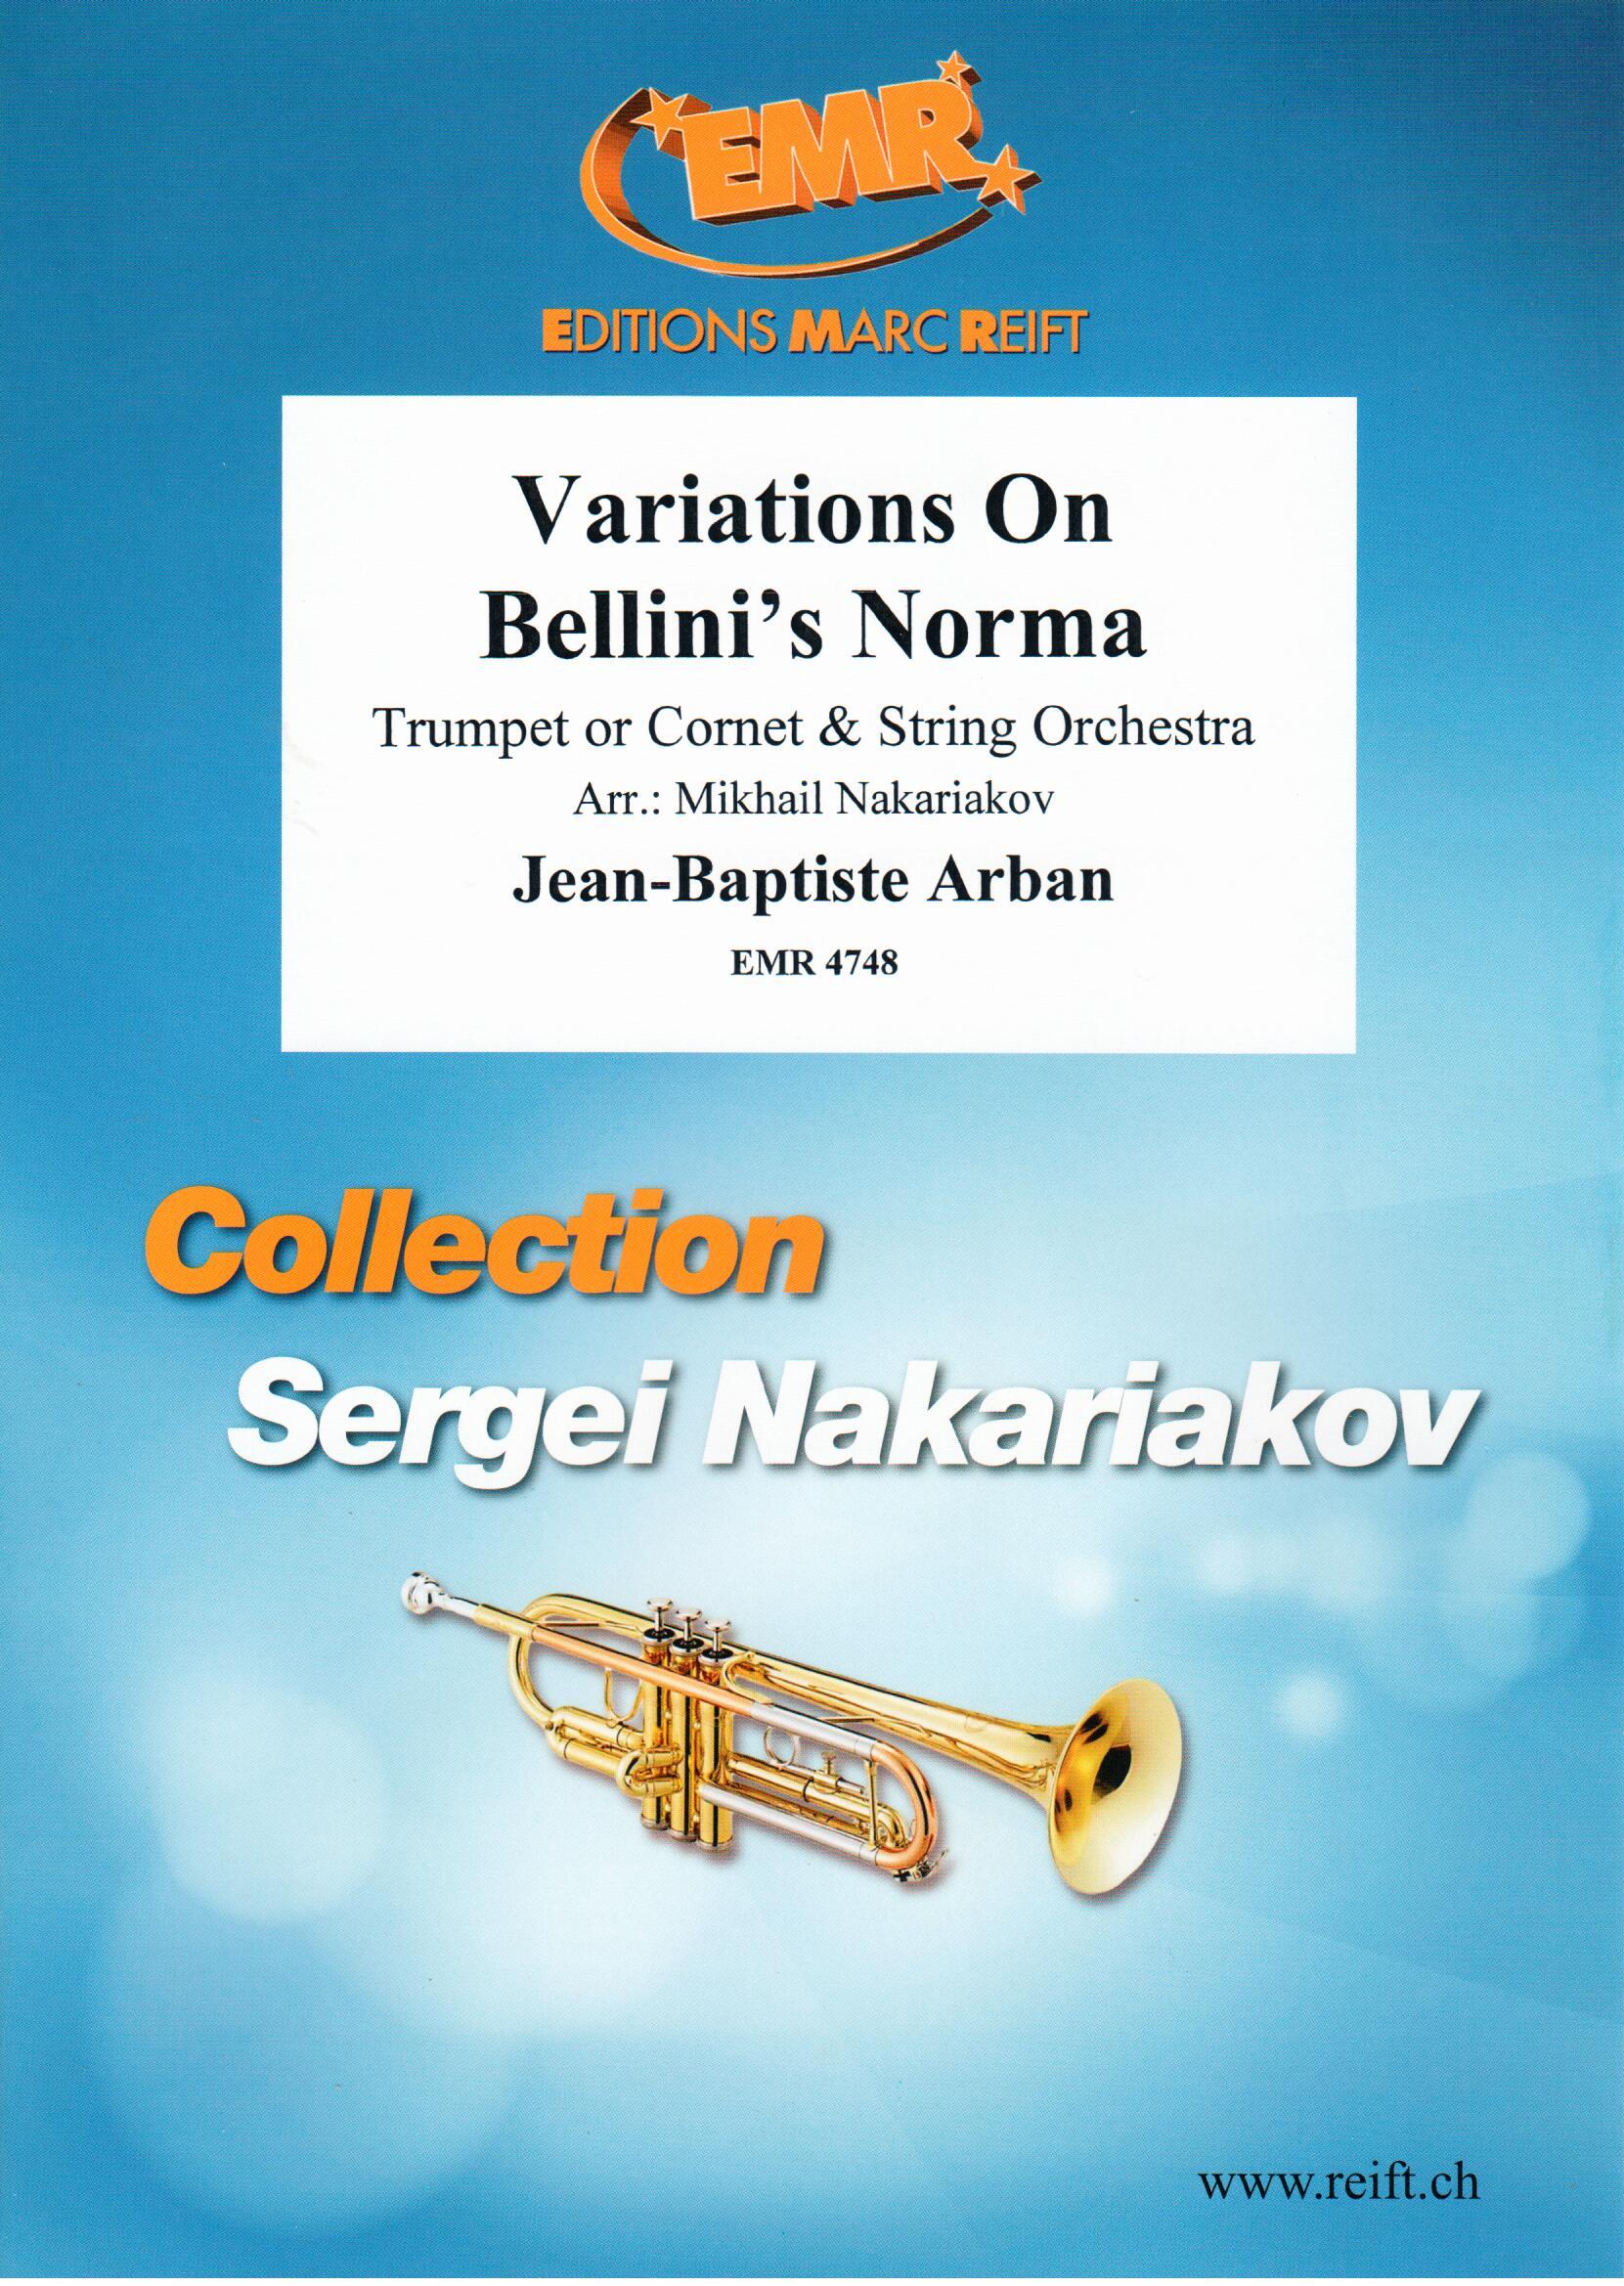 VARIATIONS ON BELLINI'S NORMA